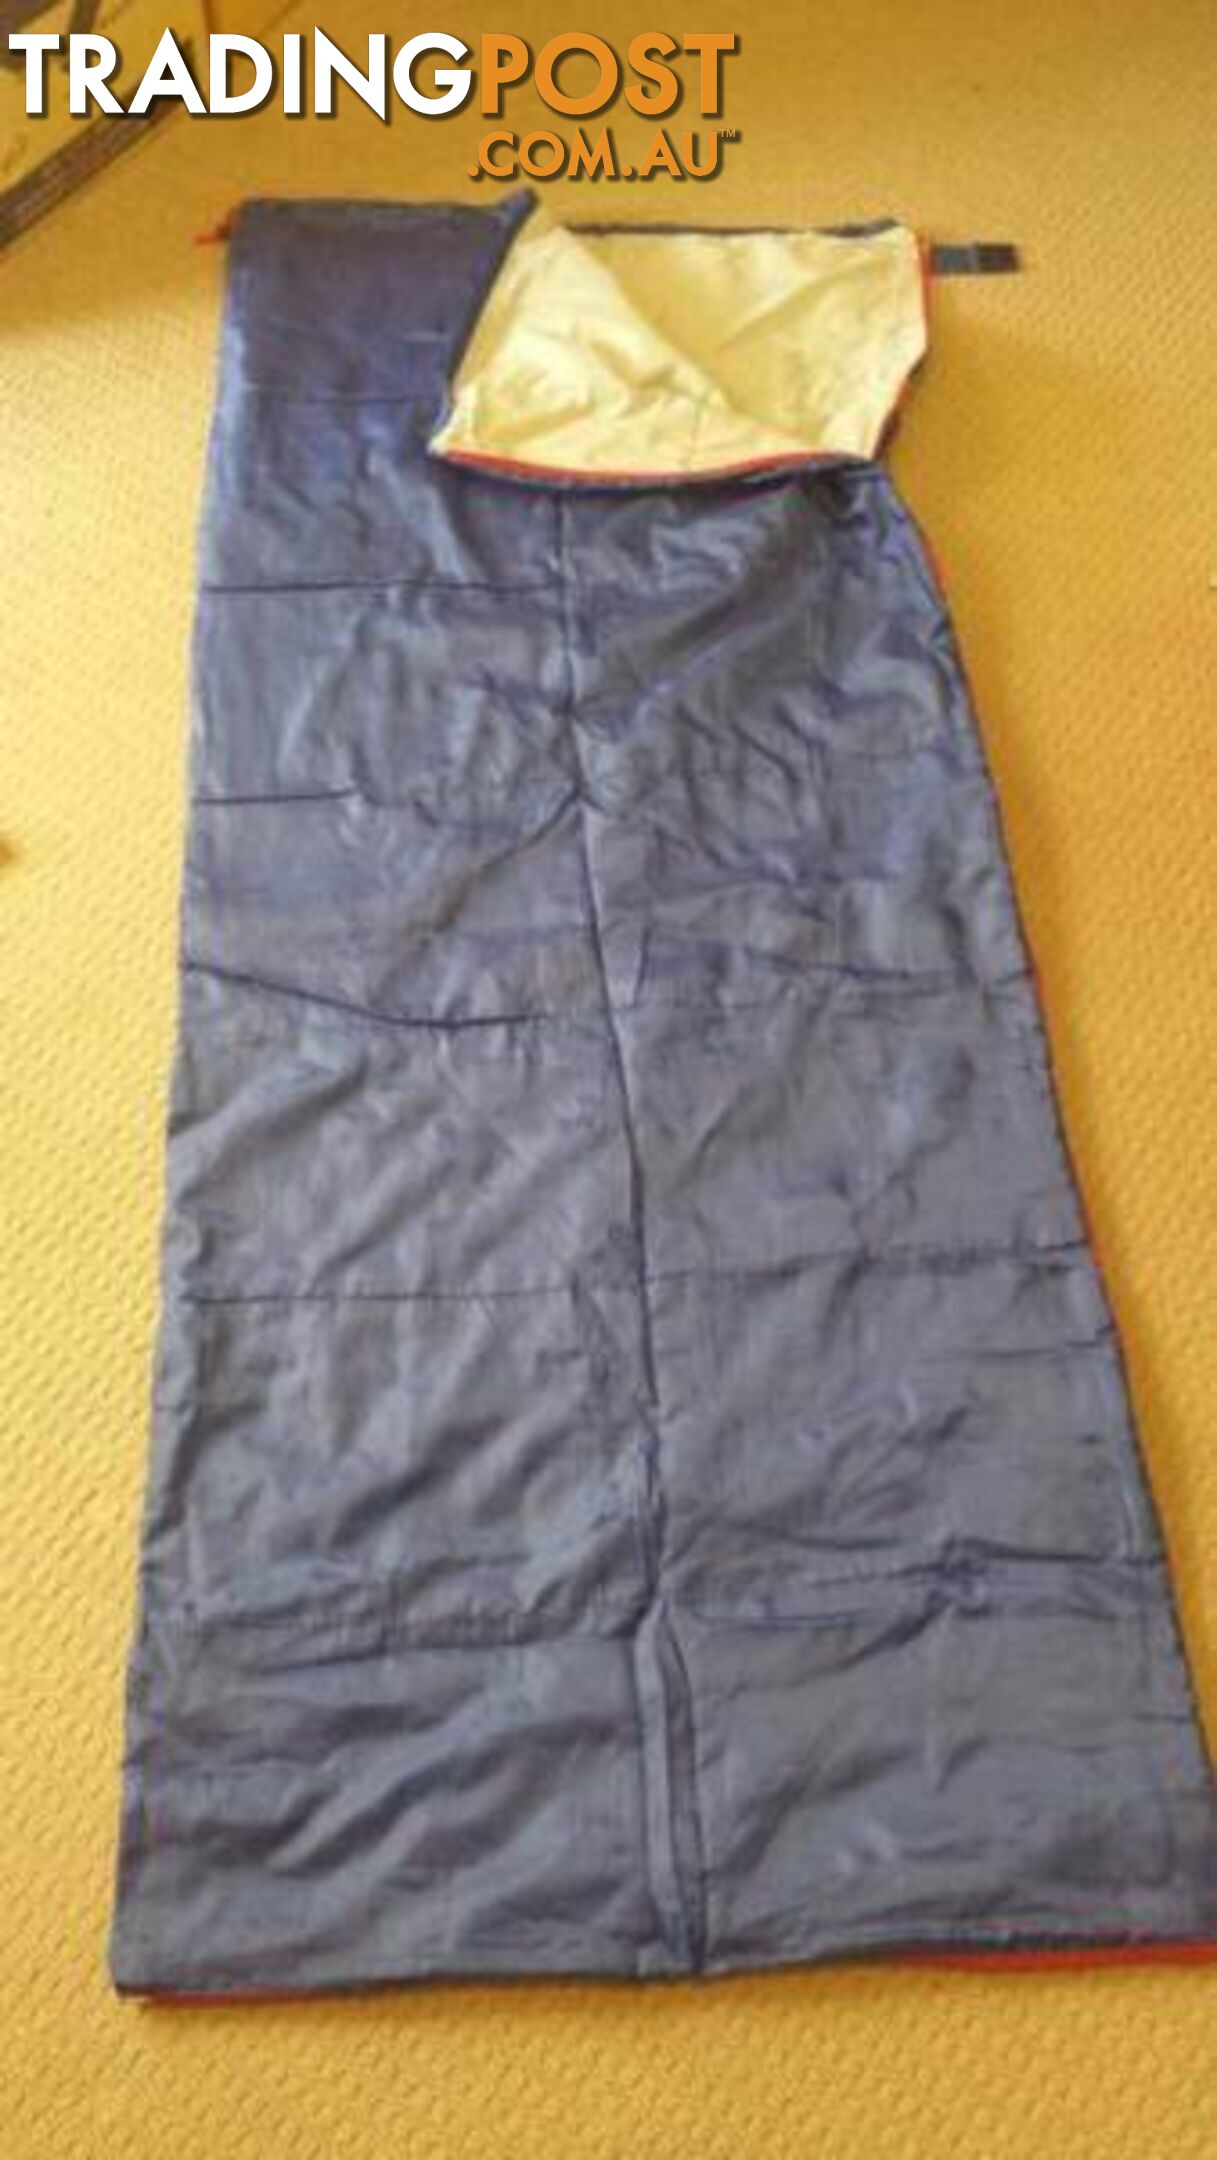 Childs Sleeping Bag - Clean and in Excellent Condition